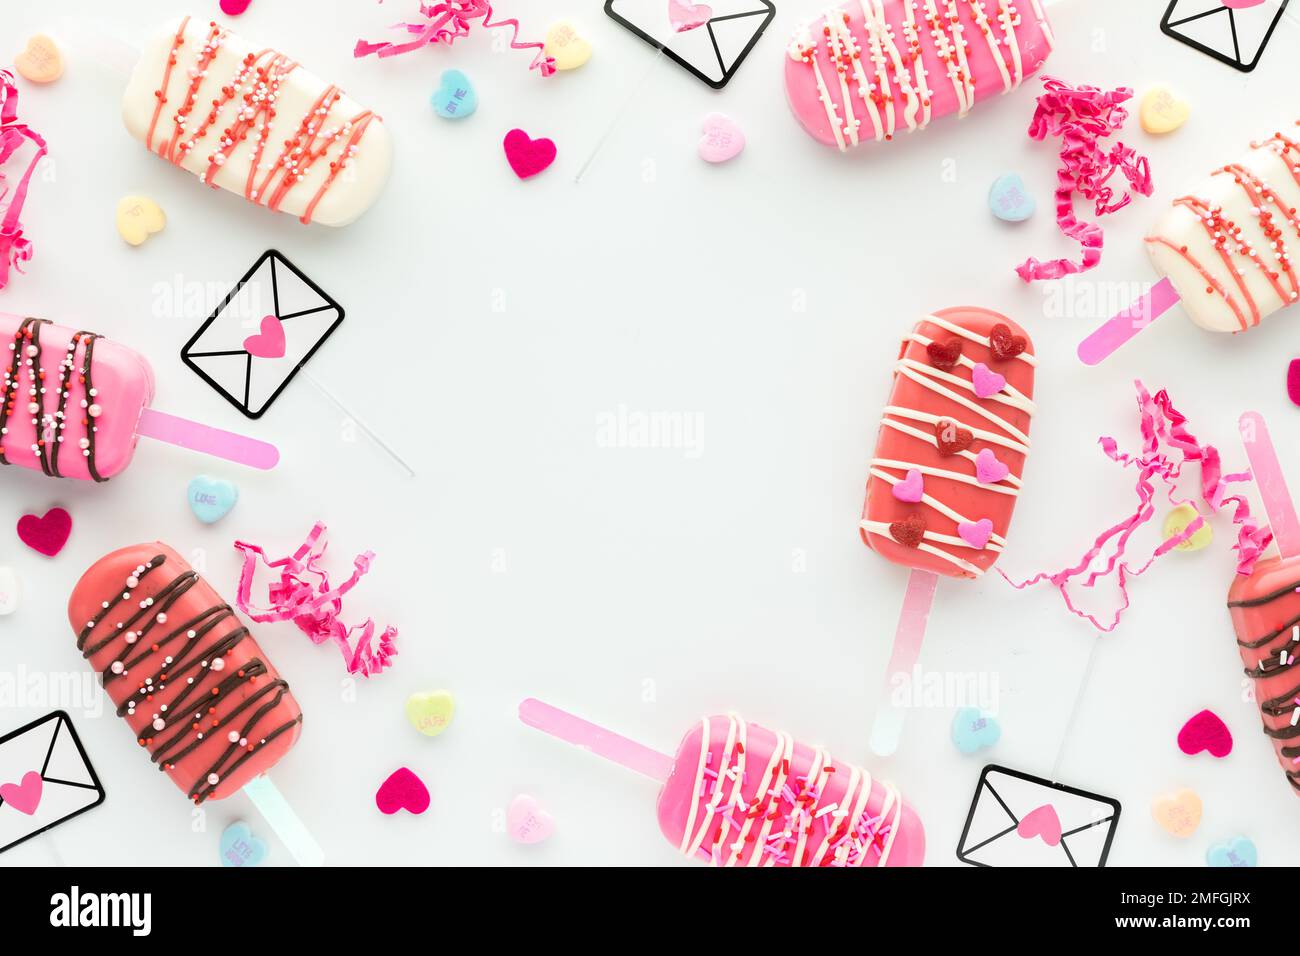 A Valentine border background including cakesicles and decorations. Stock Photo